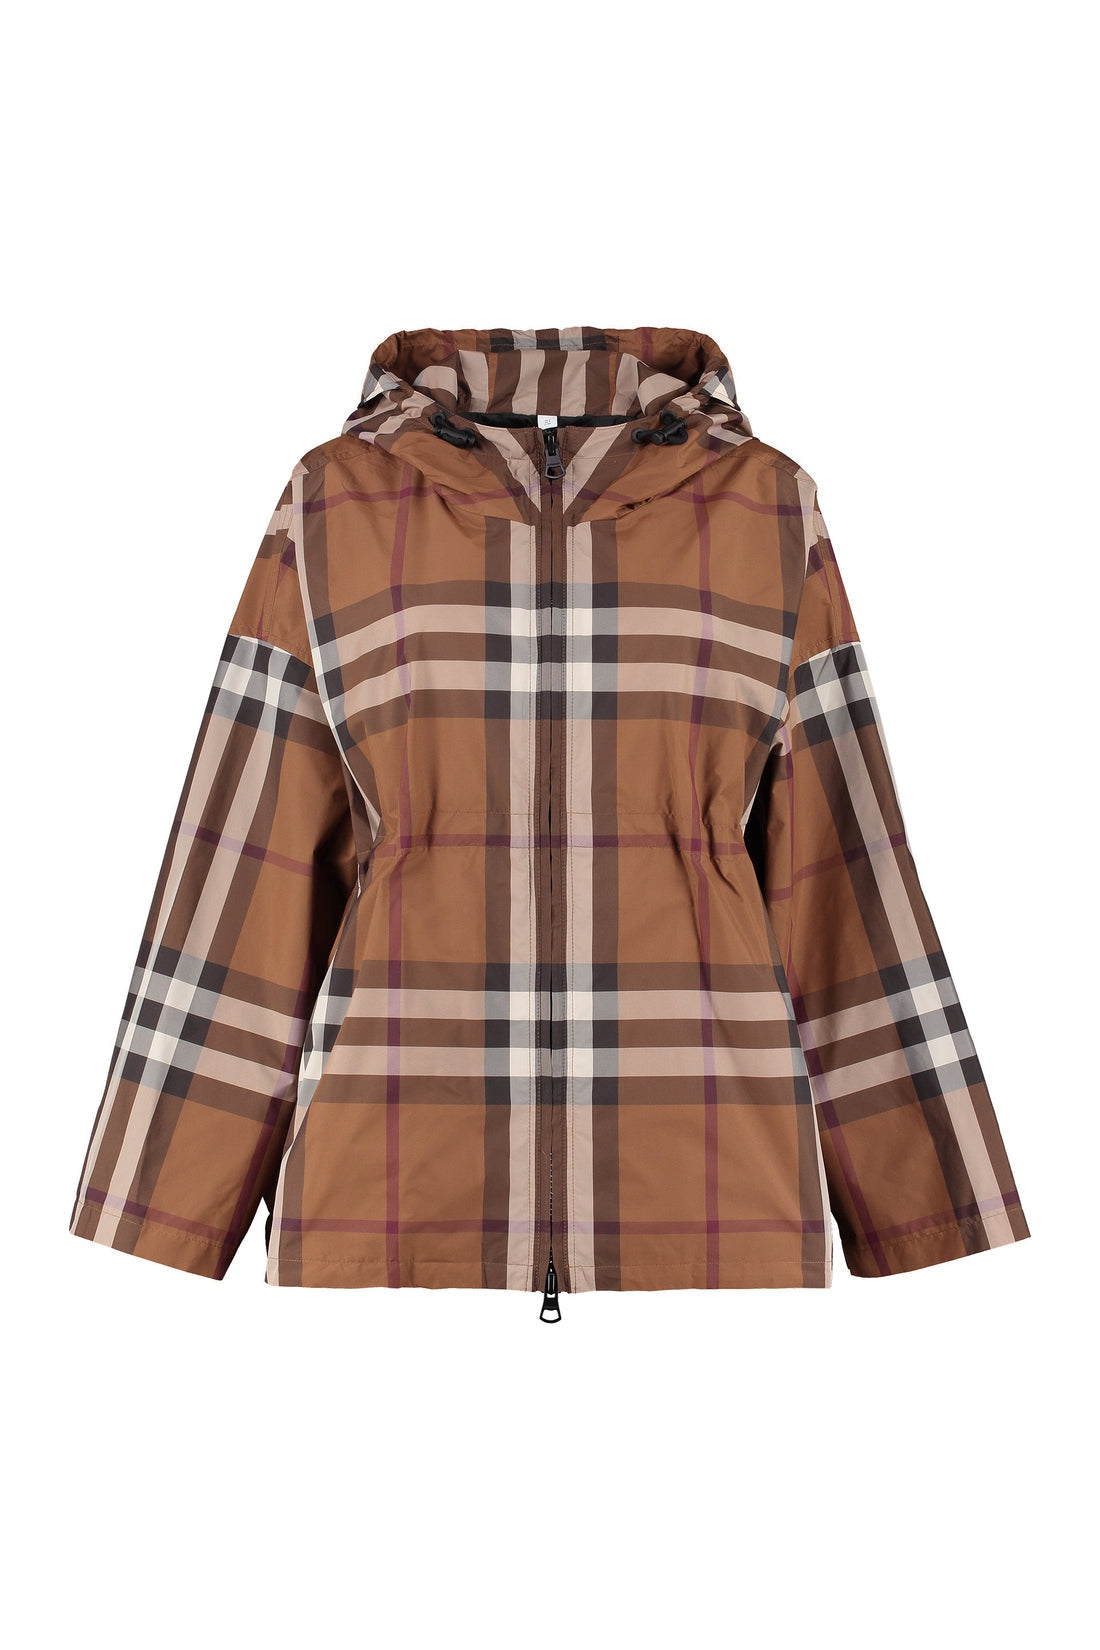 Burberry-OUTLET-SALE-Technical fabric hooded jacket-ARCHIVIST